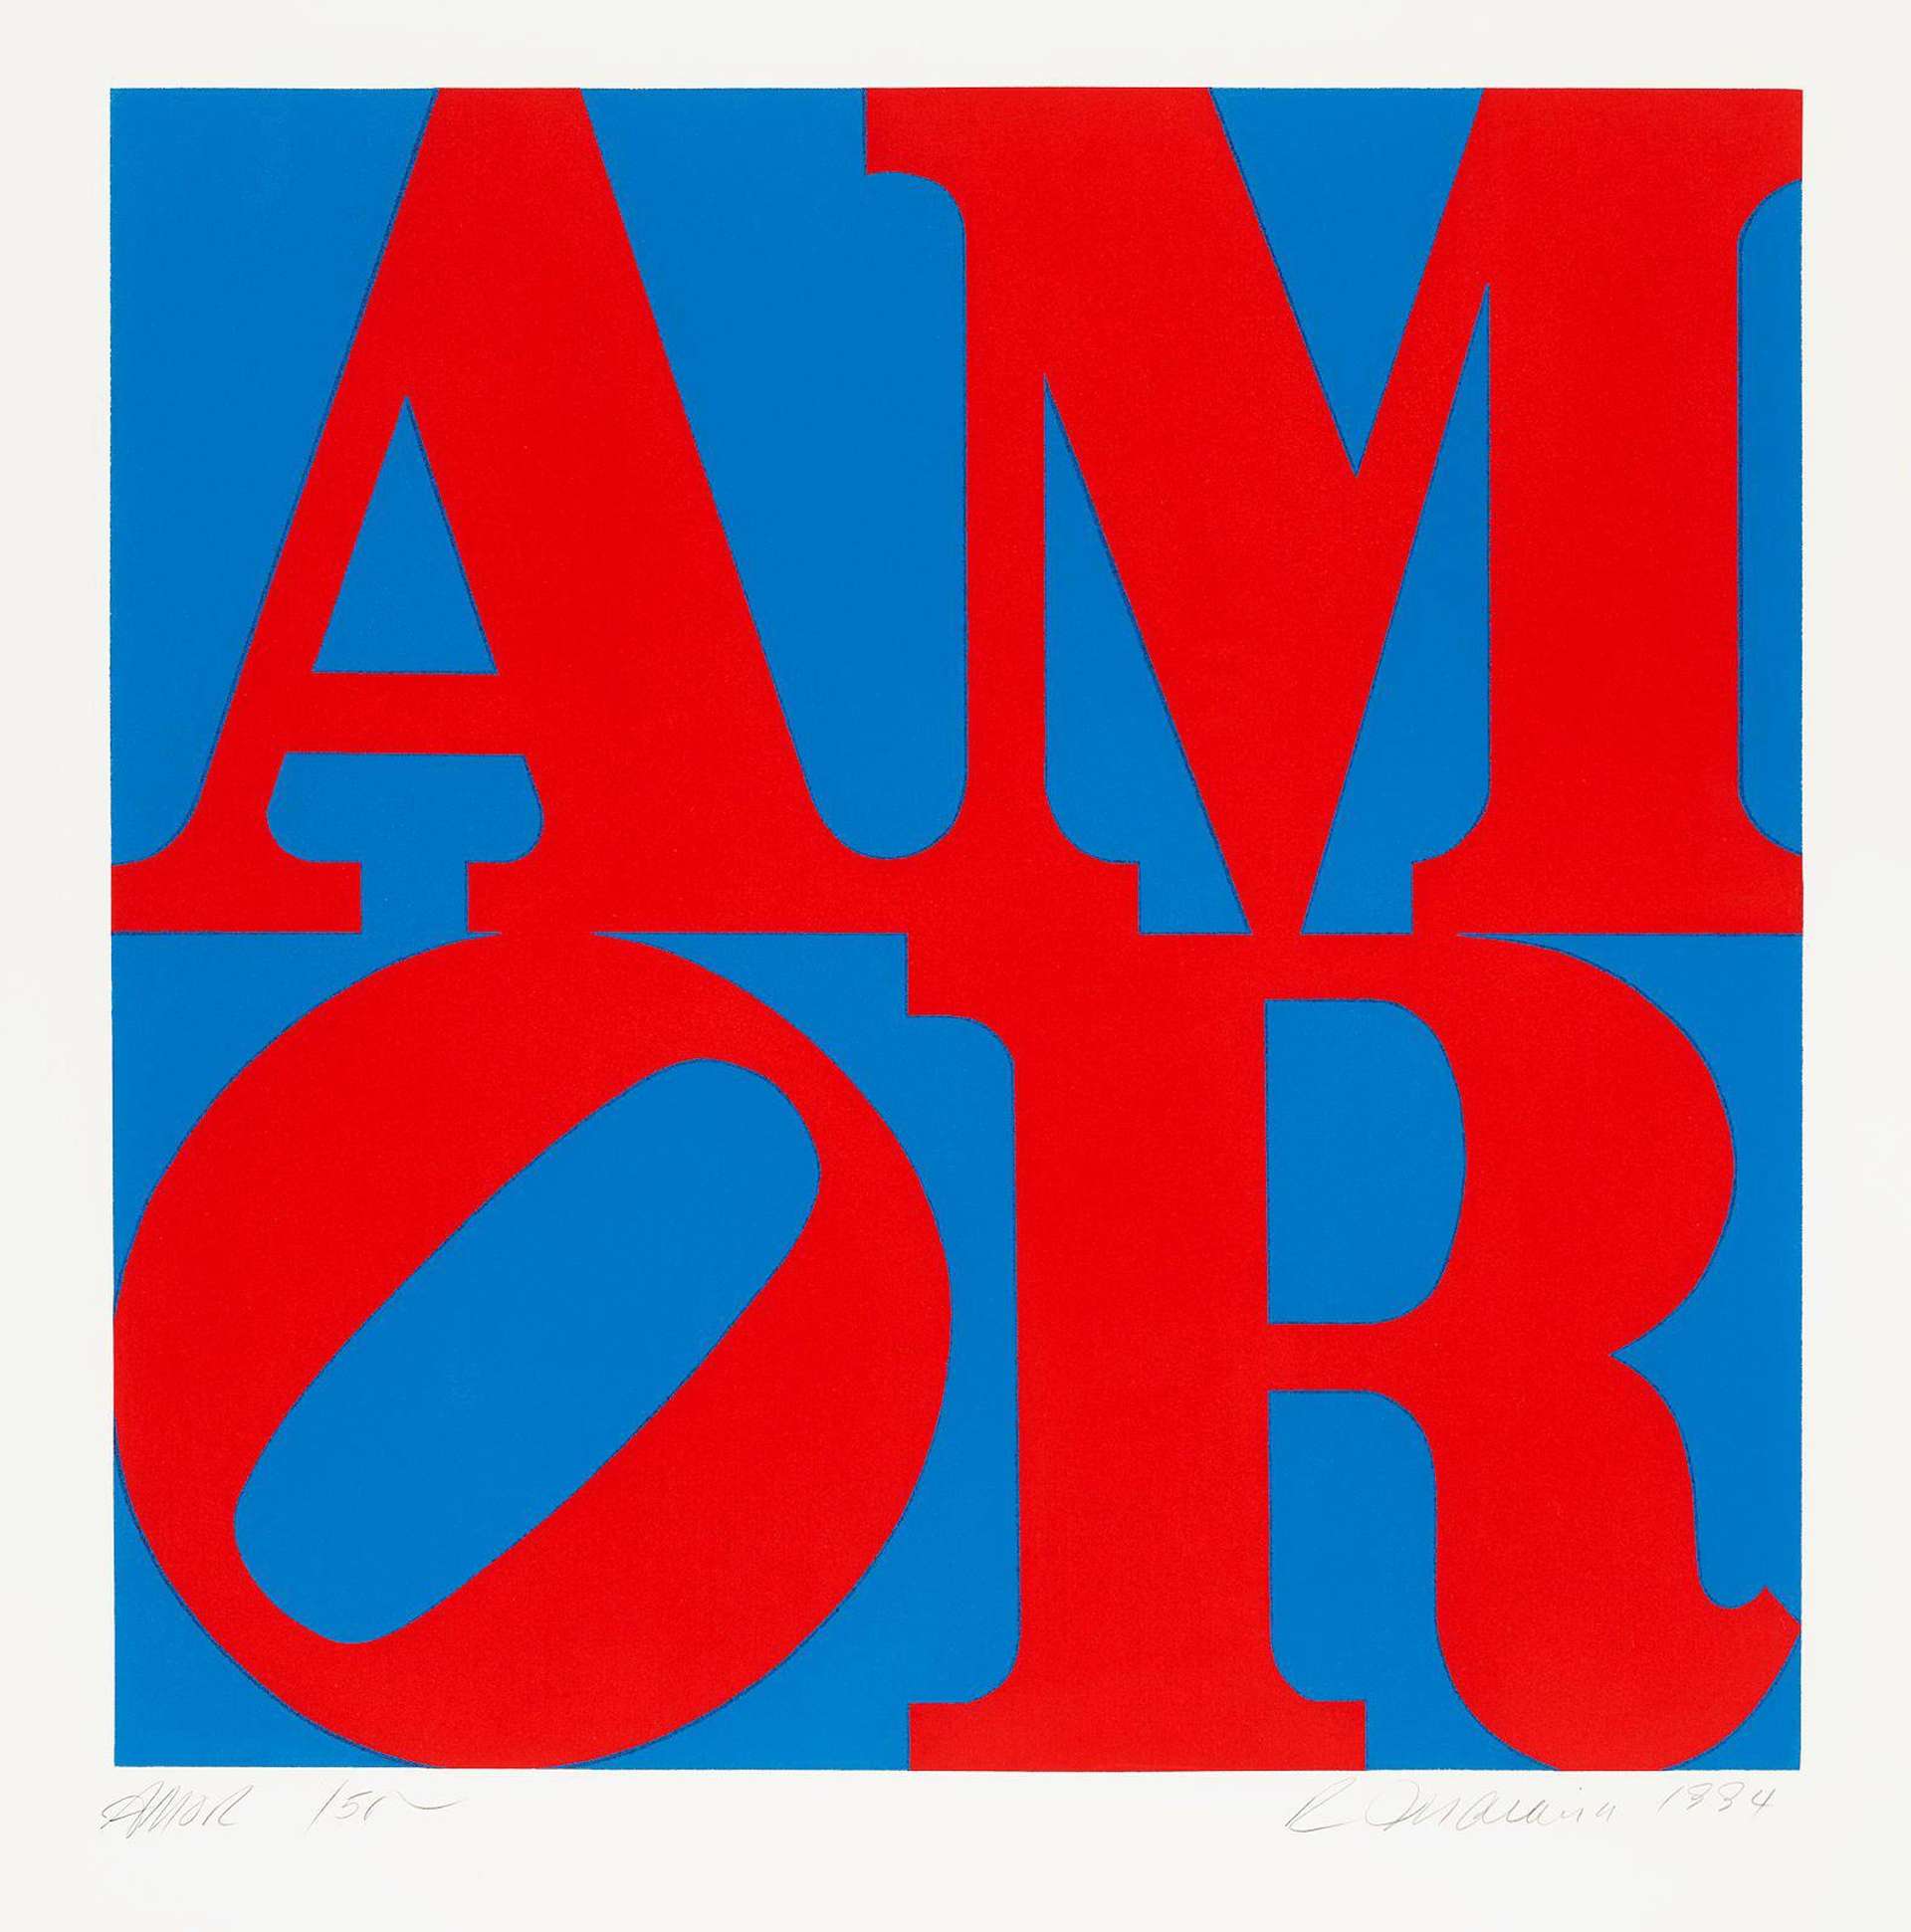 Robert Indiana: Amor (red and blue) - Signed Print